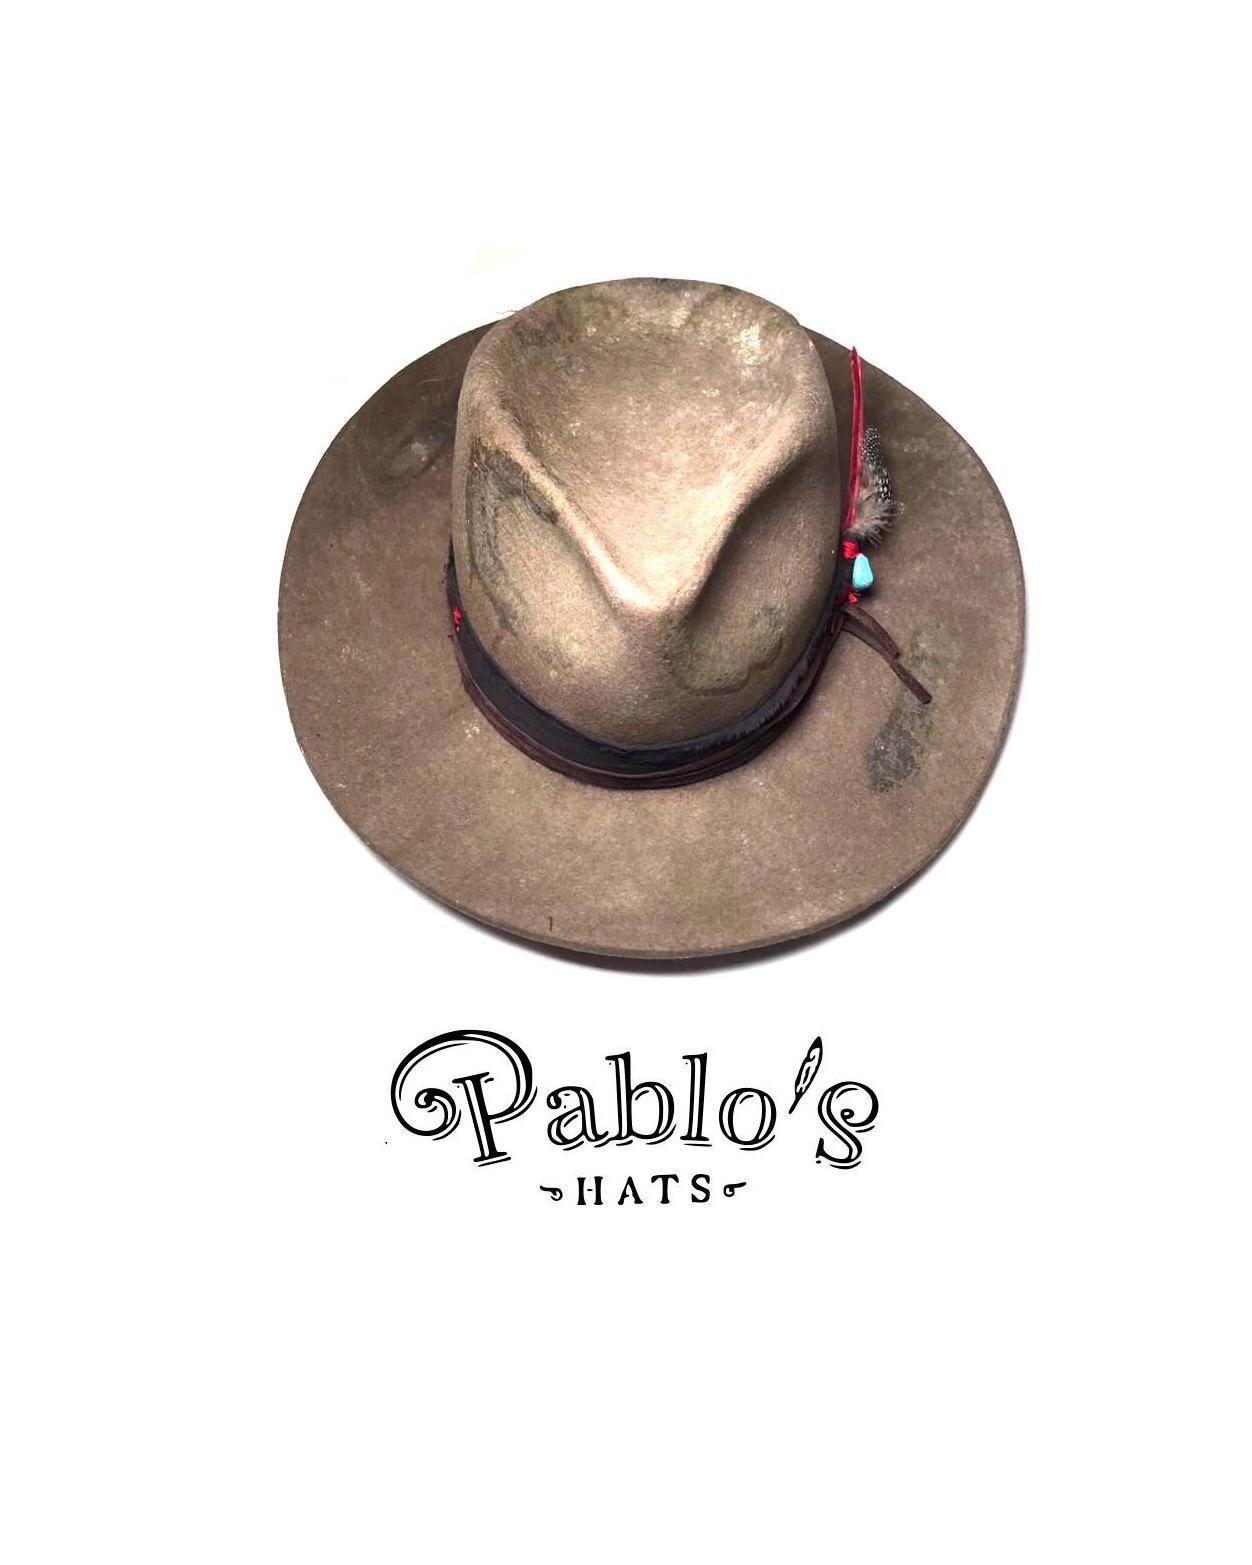 PABLO'S HATS - WELCOME TO